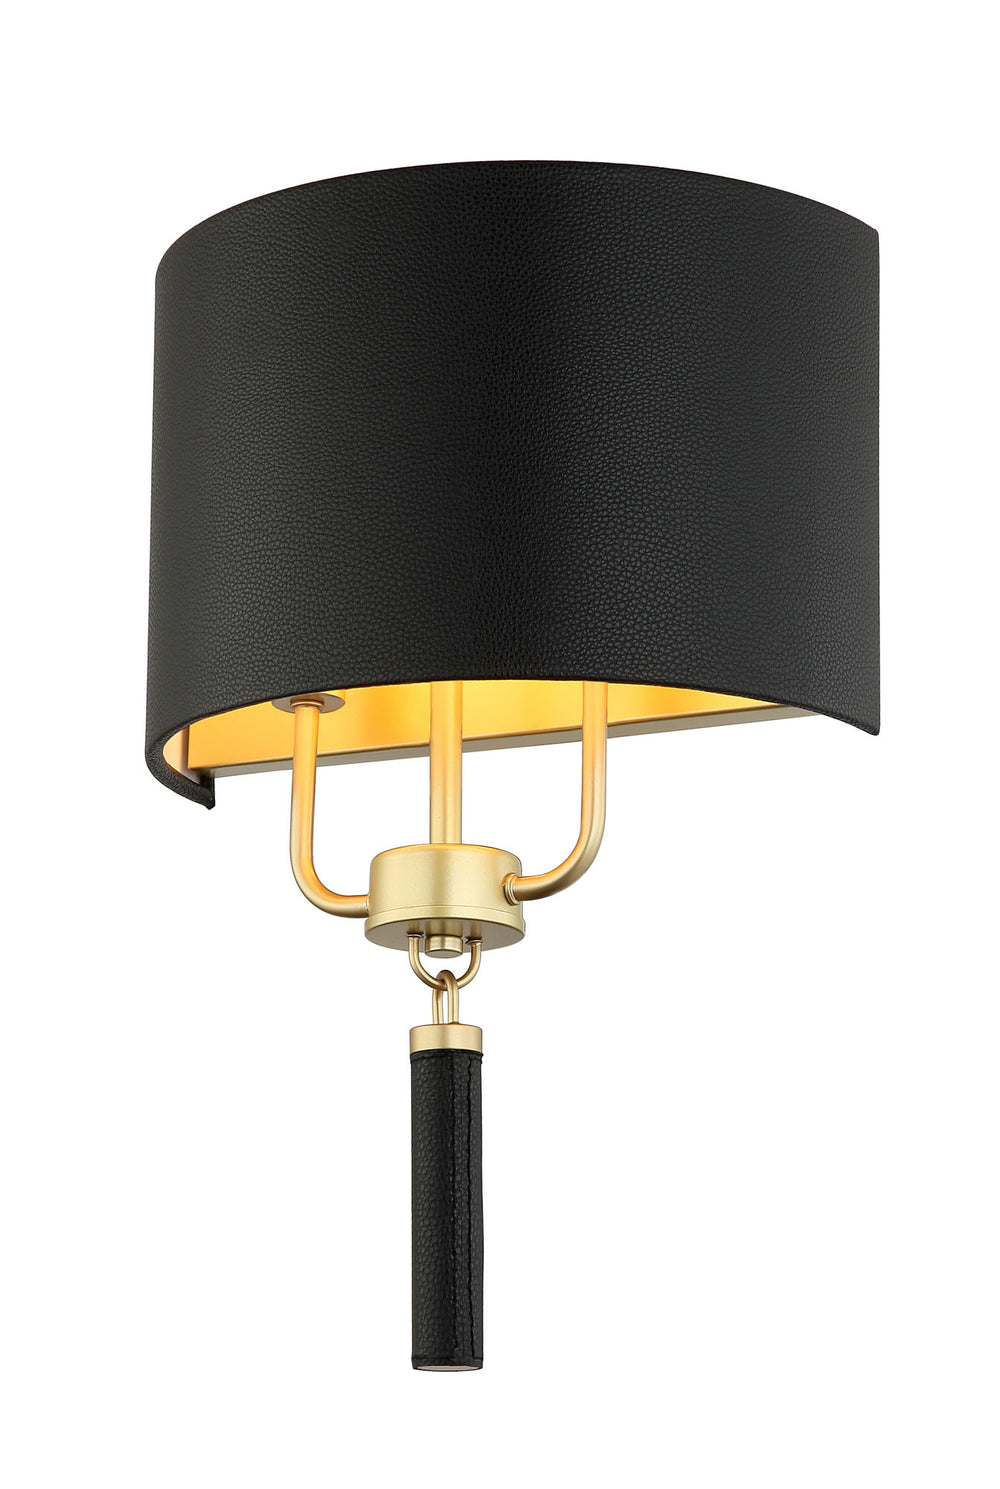 Secret Agent 368W02GOB 2-Light Wall Sconce - Painted Gold/Black Leather